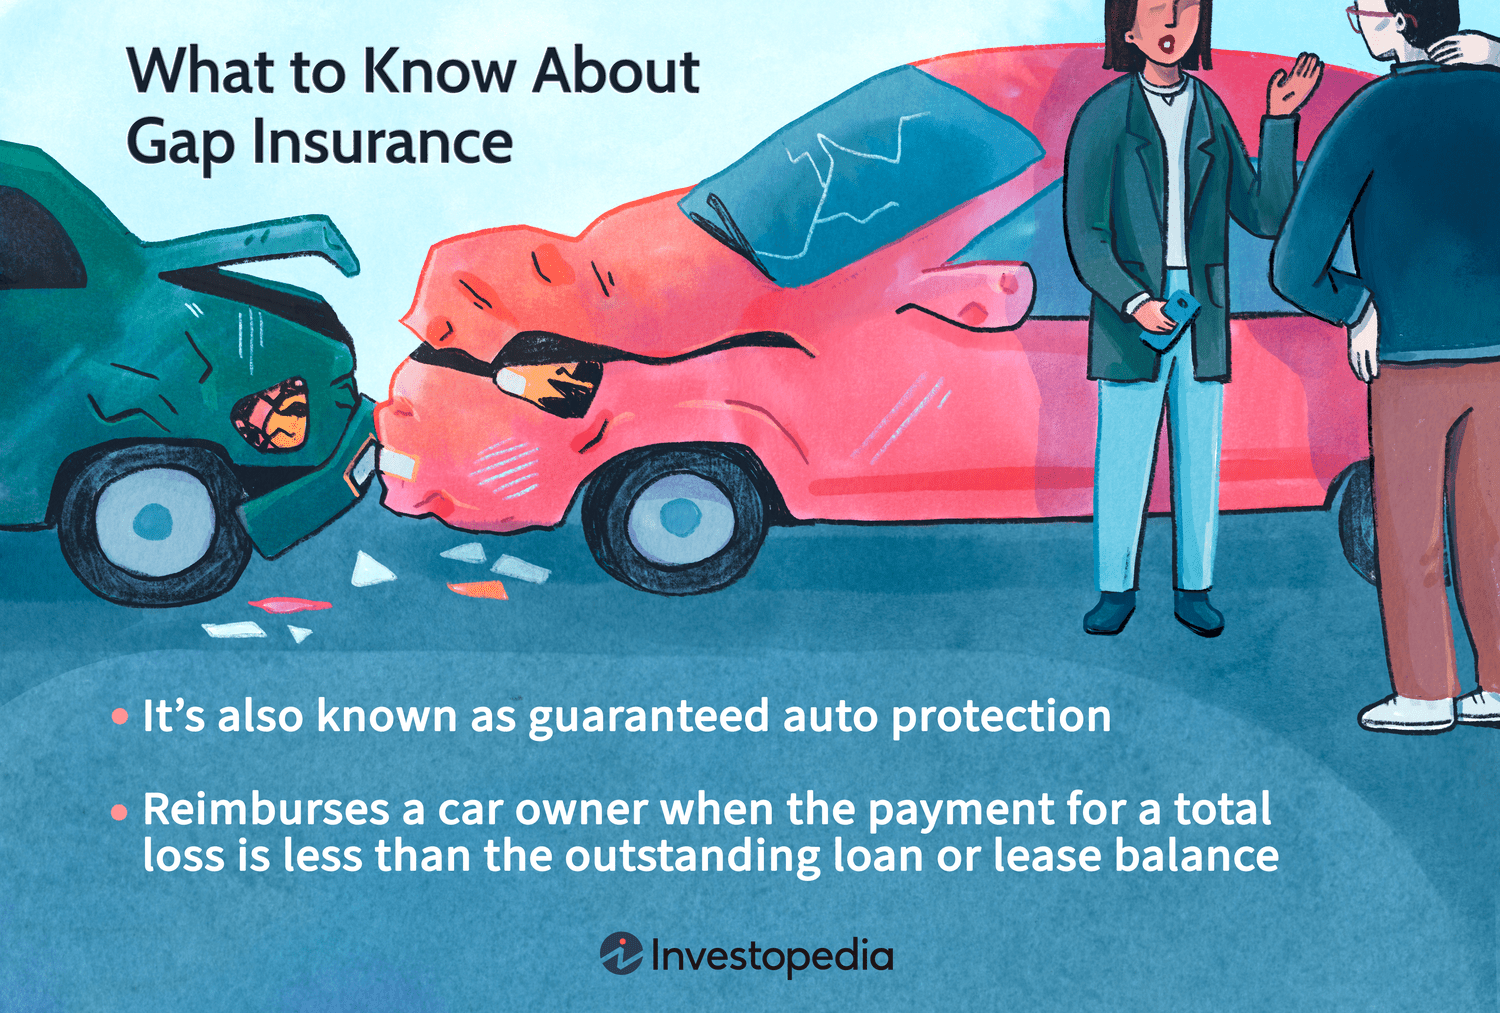 How Do I Know If My Car Has Gap Insurance